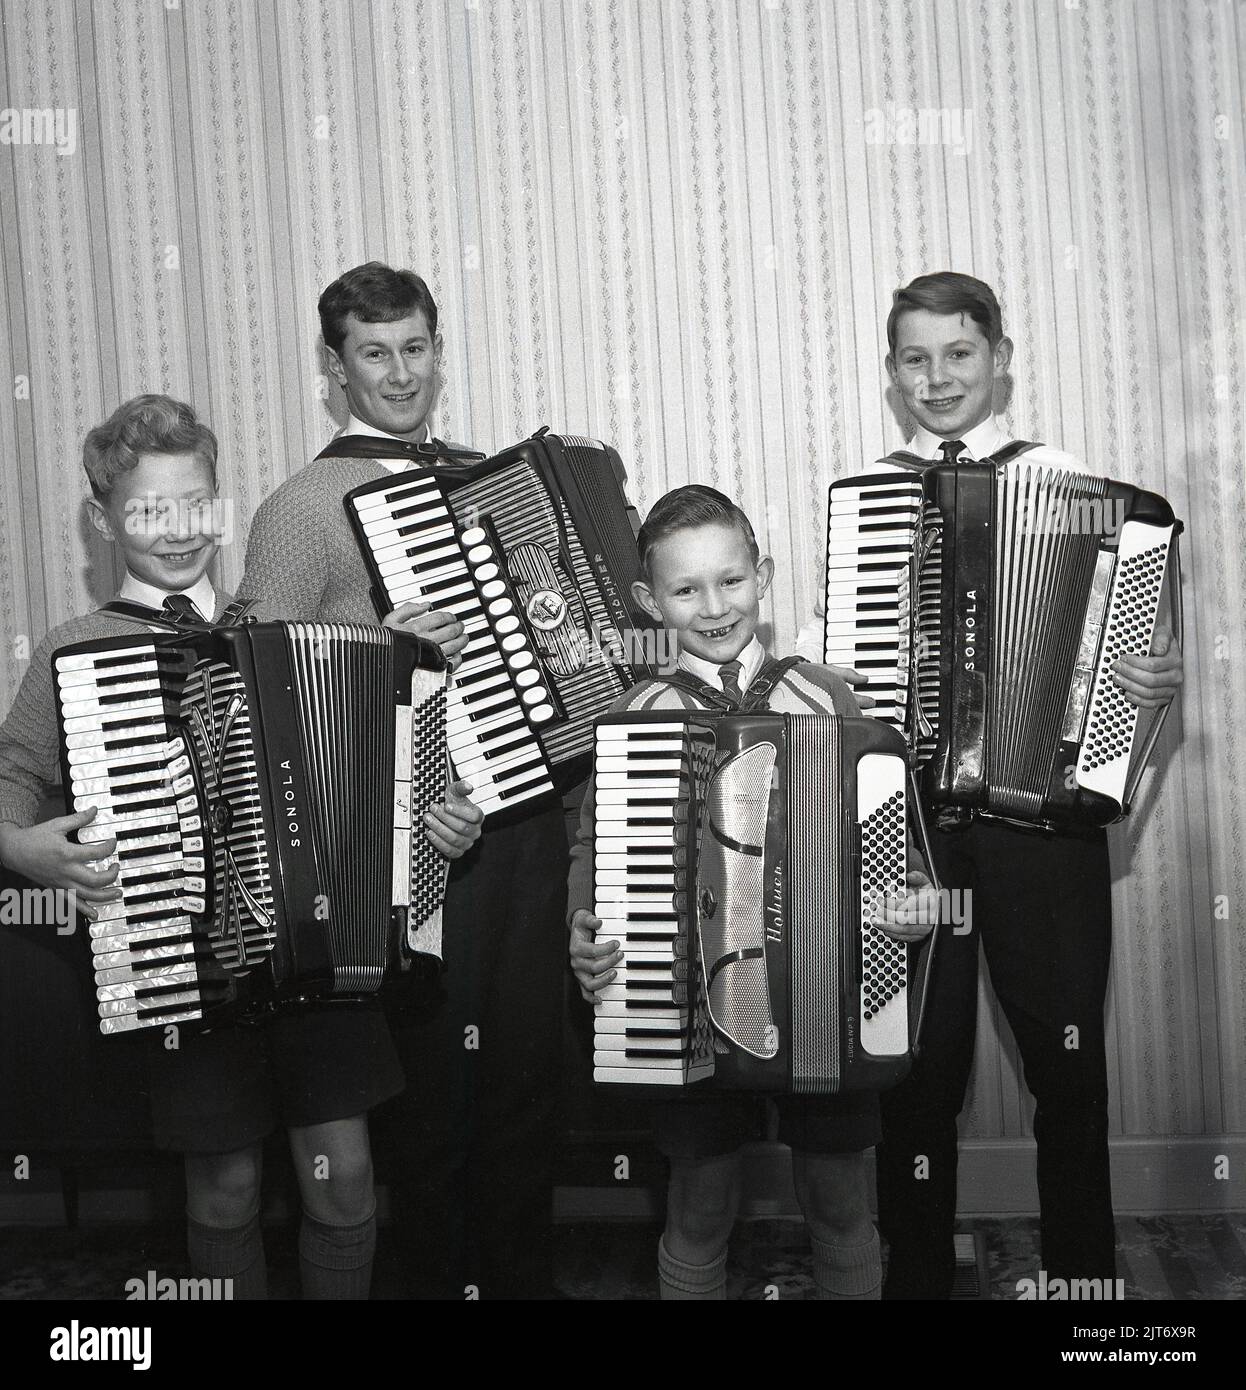 1965, historical, the winners, Scottish Accordion Champions at the Perth Accordion & Fiddle Festival, Perth Scotland, UK, standing for a photo with their musical instruments, piano accordions, so-named as they have a piano-style musical keyboards. One of the boys is holding a Sonola 120 Bass accordion, made in the Italian town of Castalfidardo at the Sonola factory, while another has a Hohner model, an accordion made in the German town of Trossingen. The first Accordion & Fiddle Festival was held in the Scottish town of Perth in 1950. Stock Photo